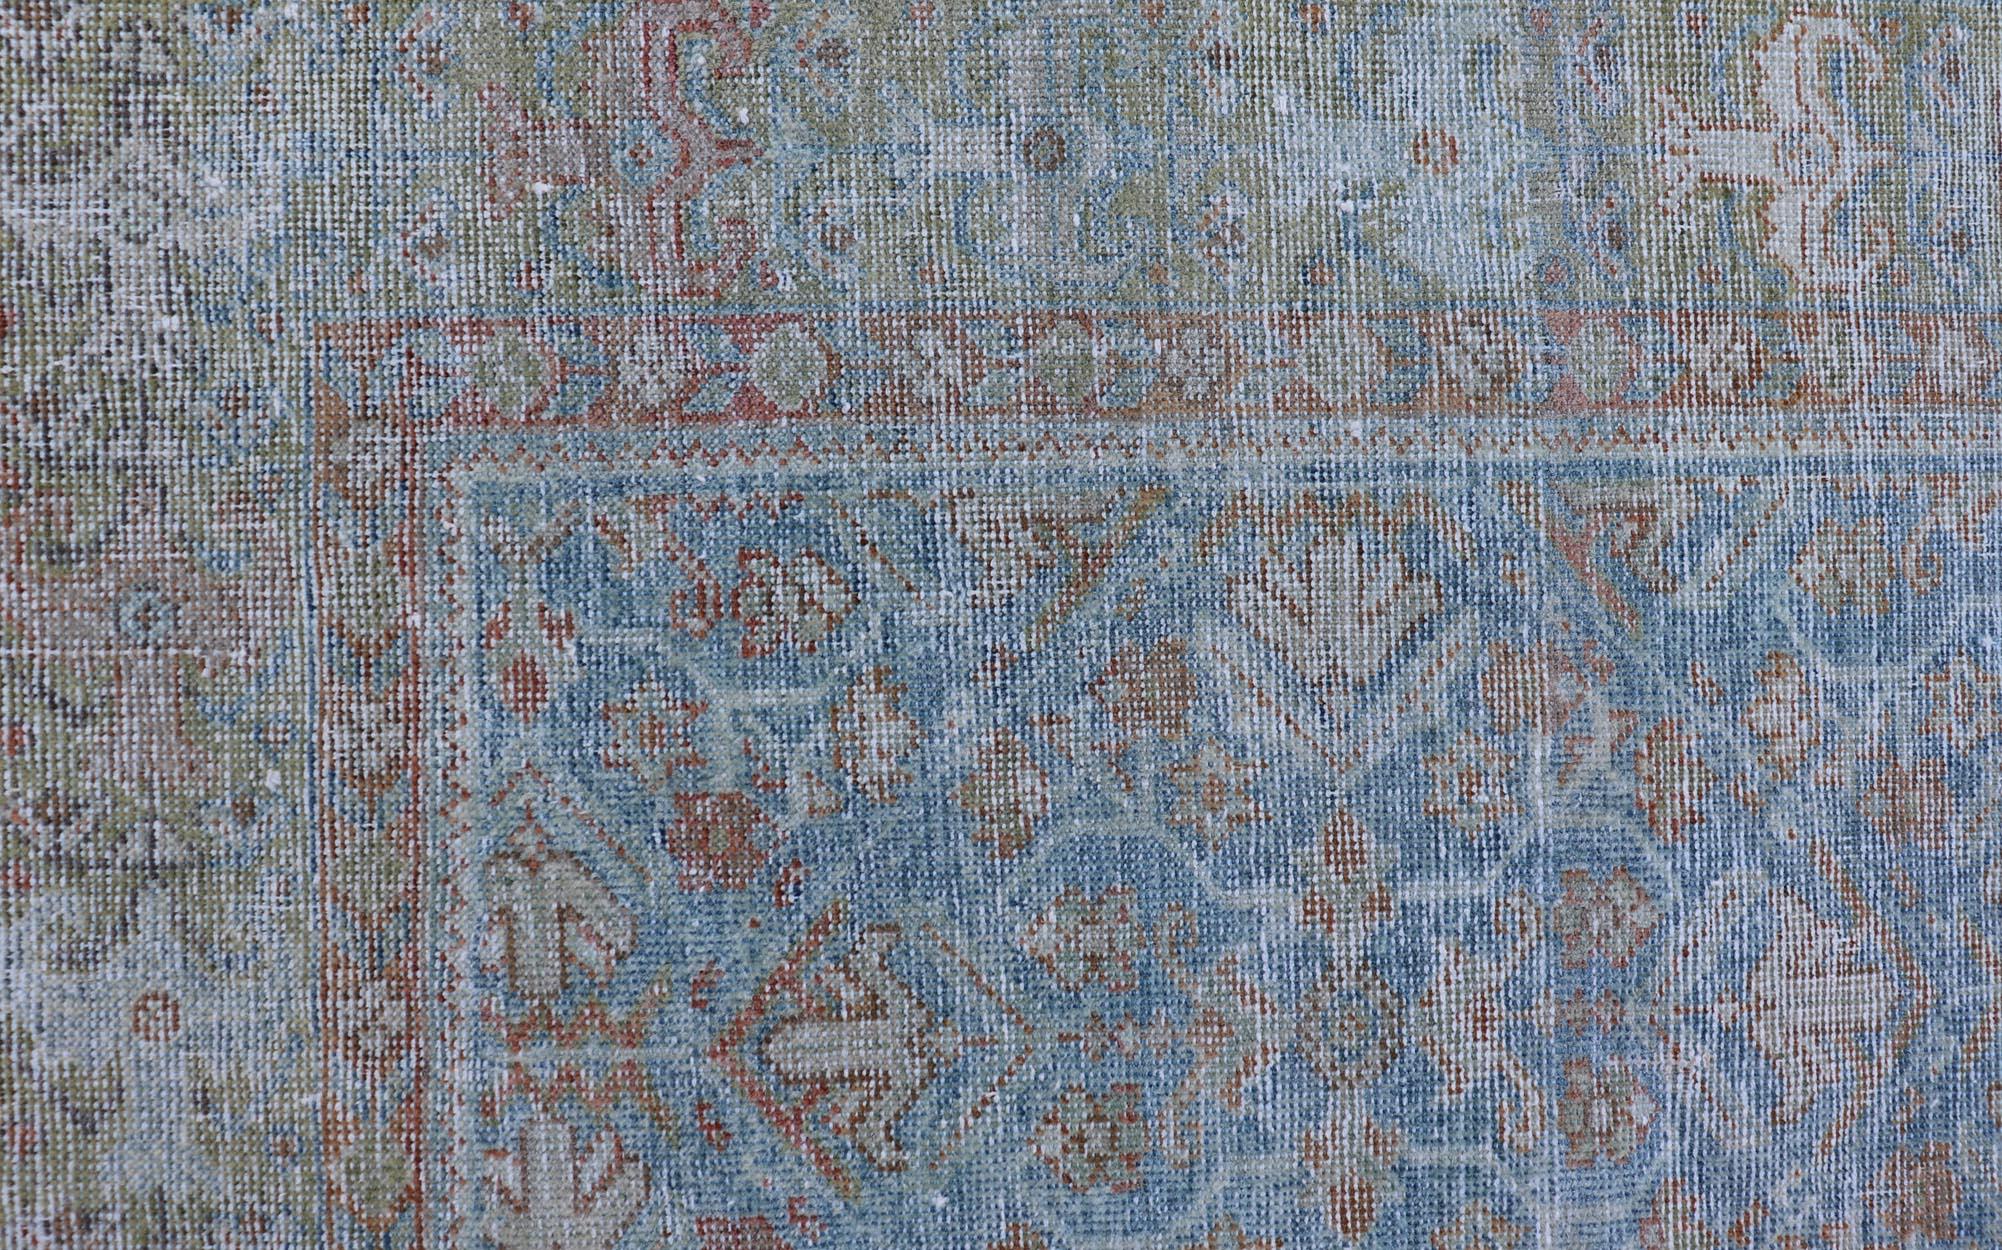 Antique Persian Sultanabad Rug in Light Blue and Green With All-Over Design. Keivan Woven Arts / rug EMB-22179-15043, country of origin / type: Iran / Sultanabad, circa 1910 
Measures: 4'2 x 6'5 
This beautiful distressed antique Persian Sultanabad,